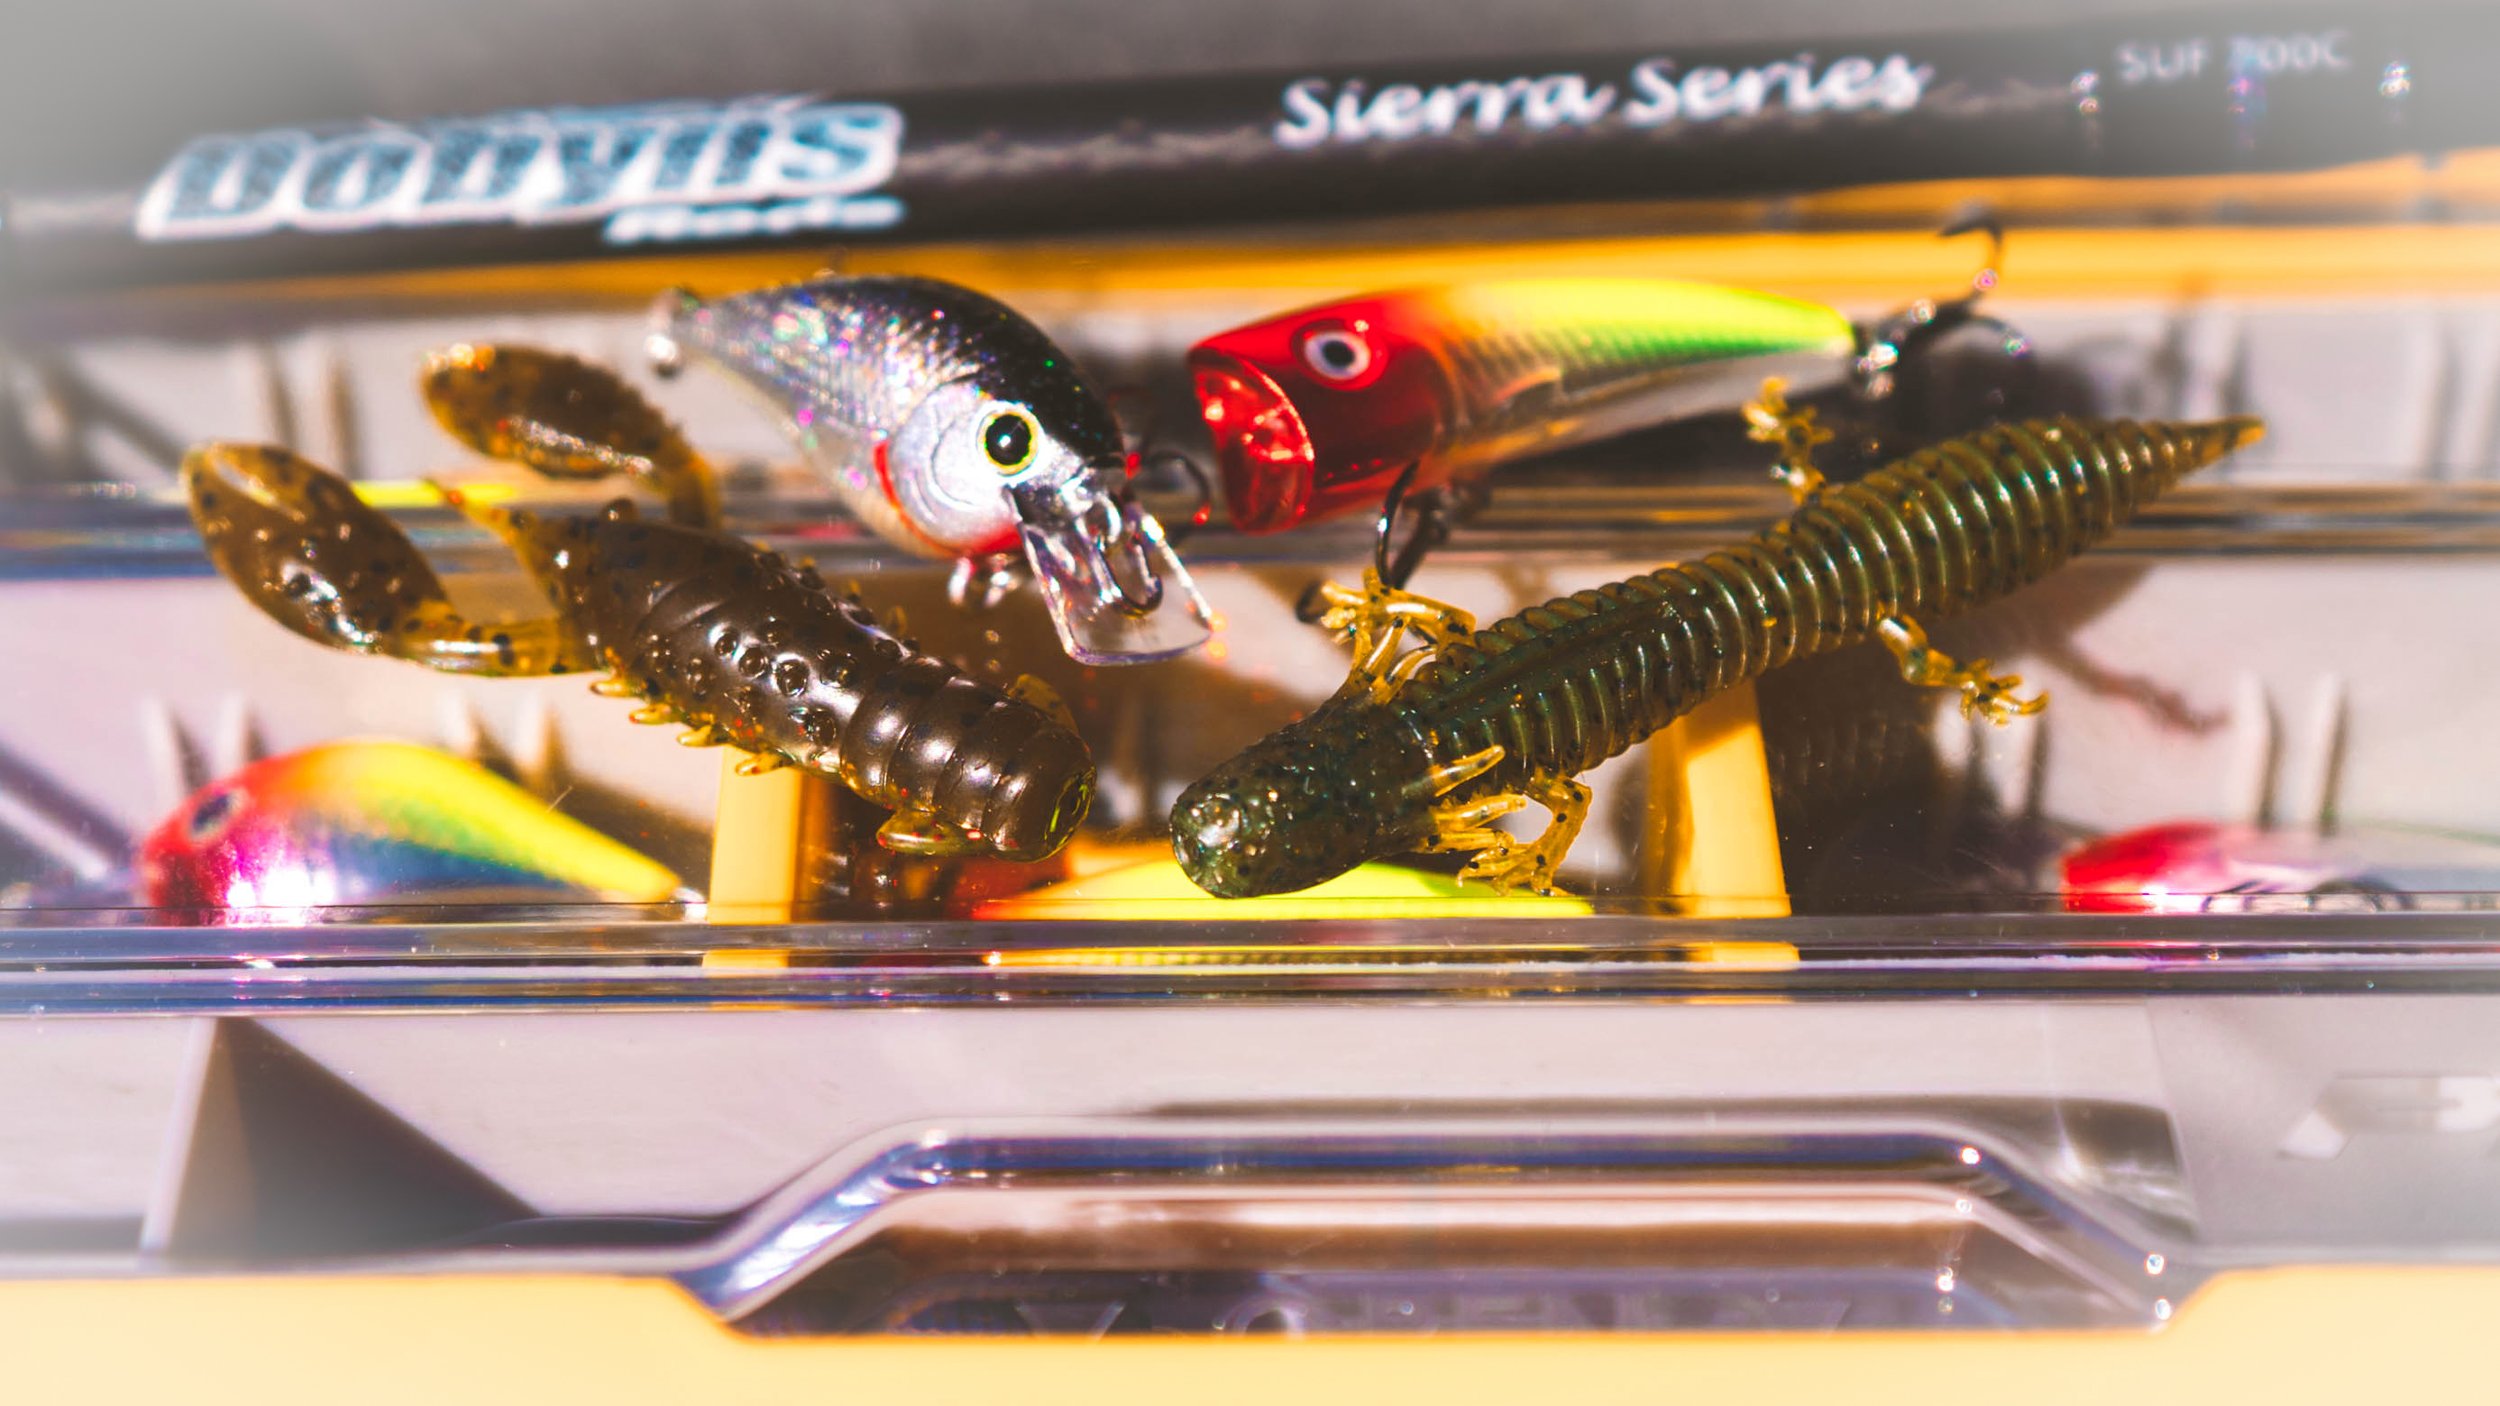 BUYER'S GUIDE: NED RIG - BAITS, HOOKS, AND RODS FOR NED RIGGING